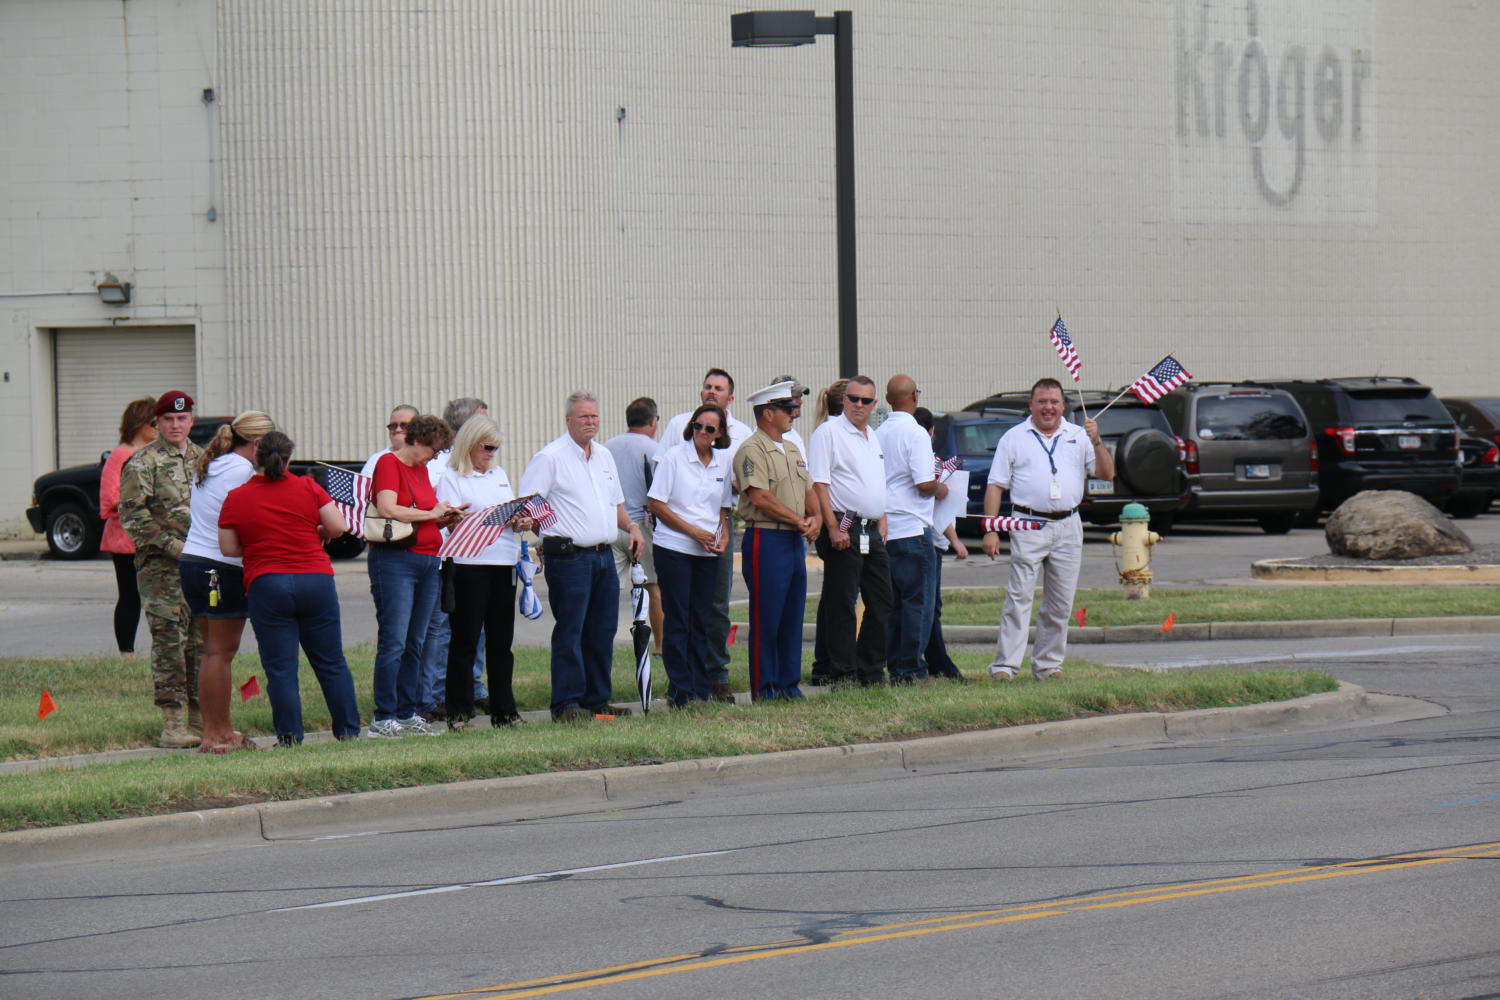 Kroger employees join veterans along the curbside to watch Sgt. Hunters funeral procession.